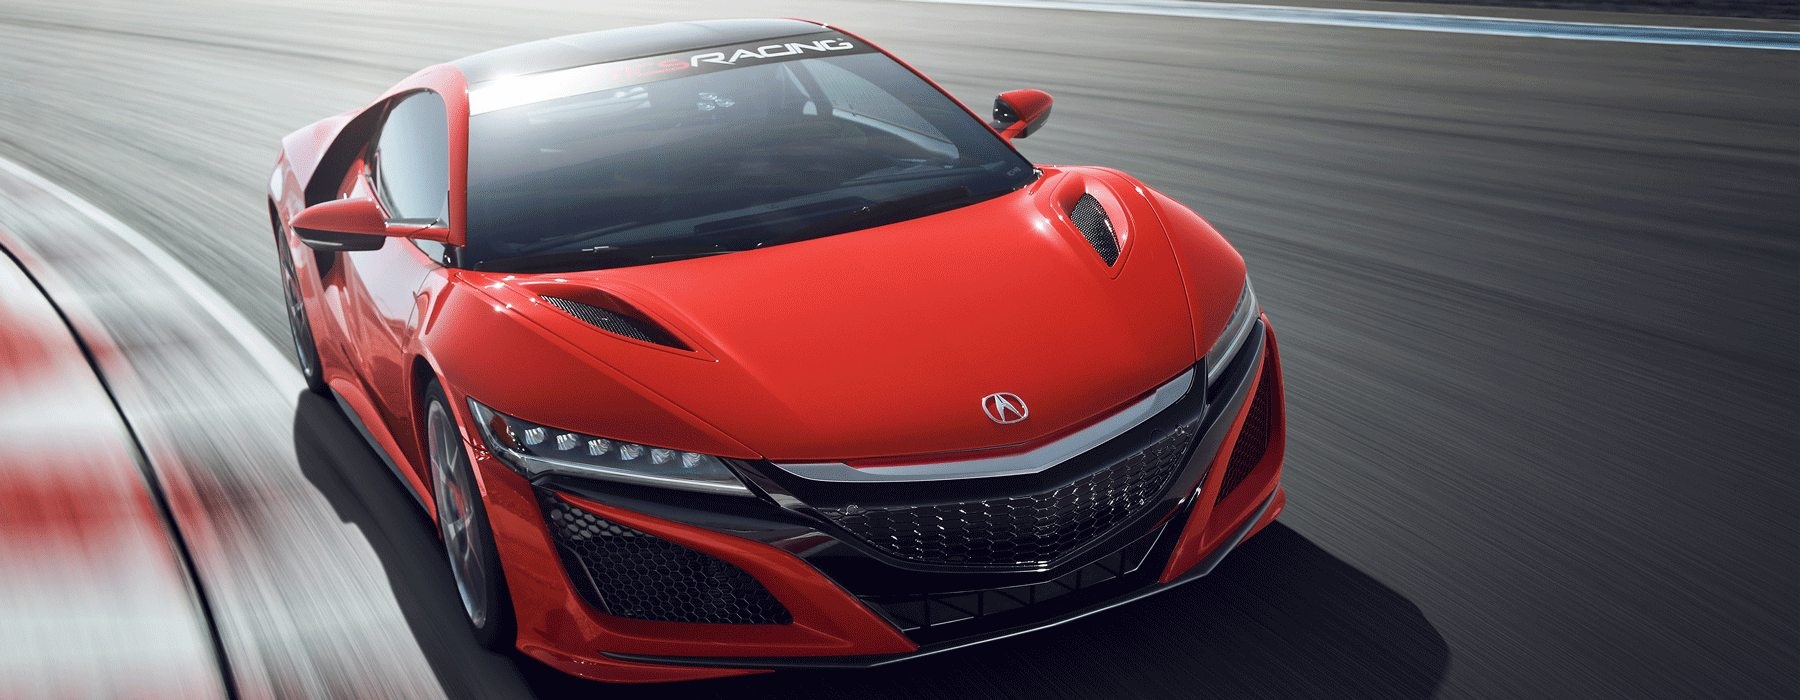 Drive an Acura NSX On a Racetrack at Exotics Racing